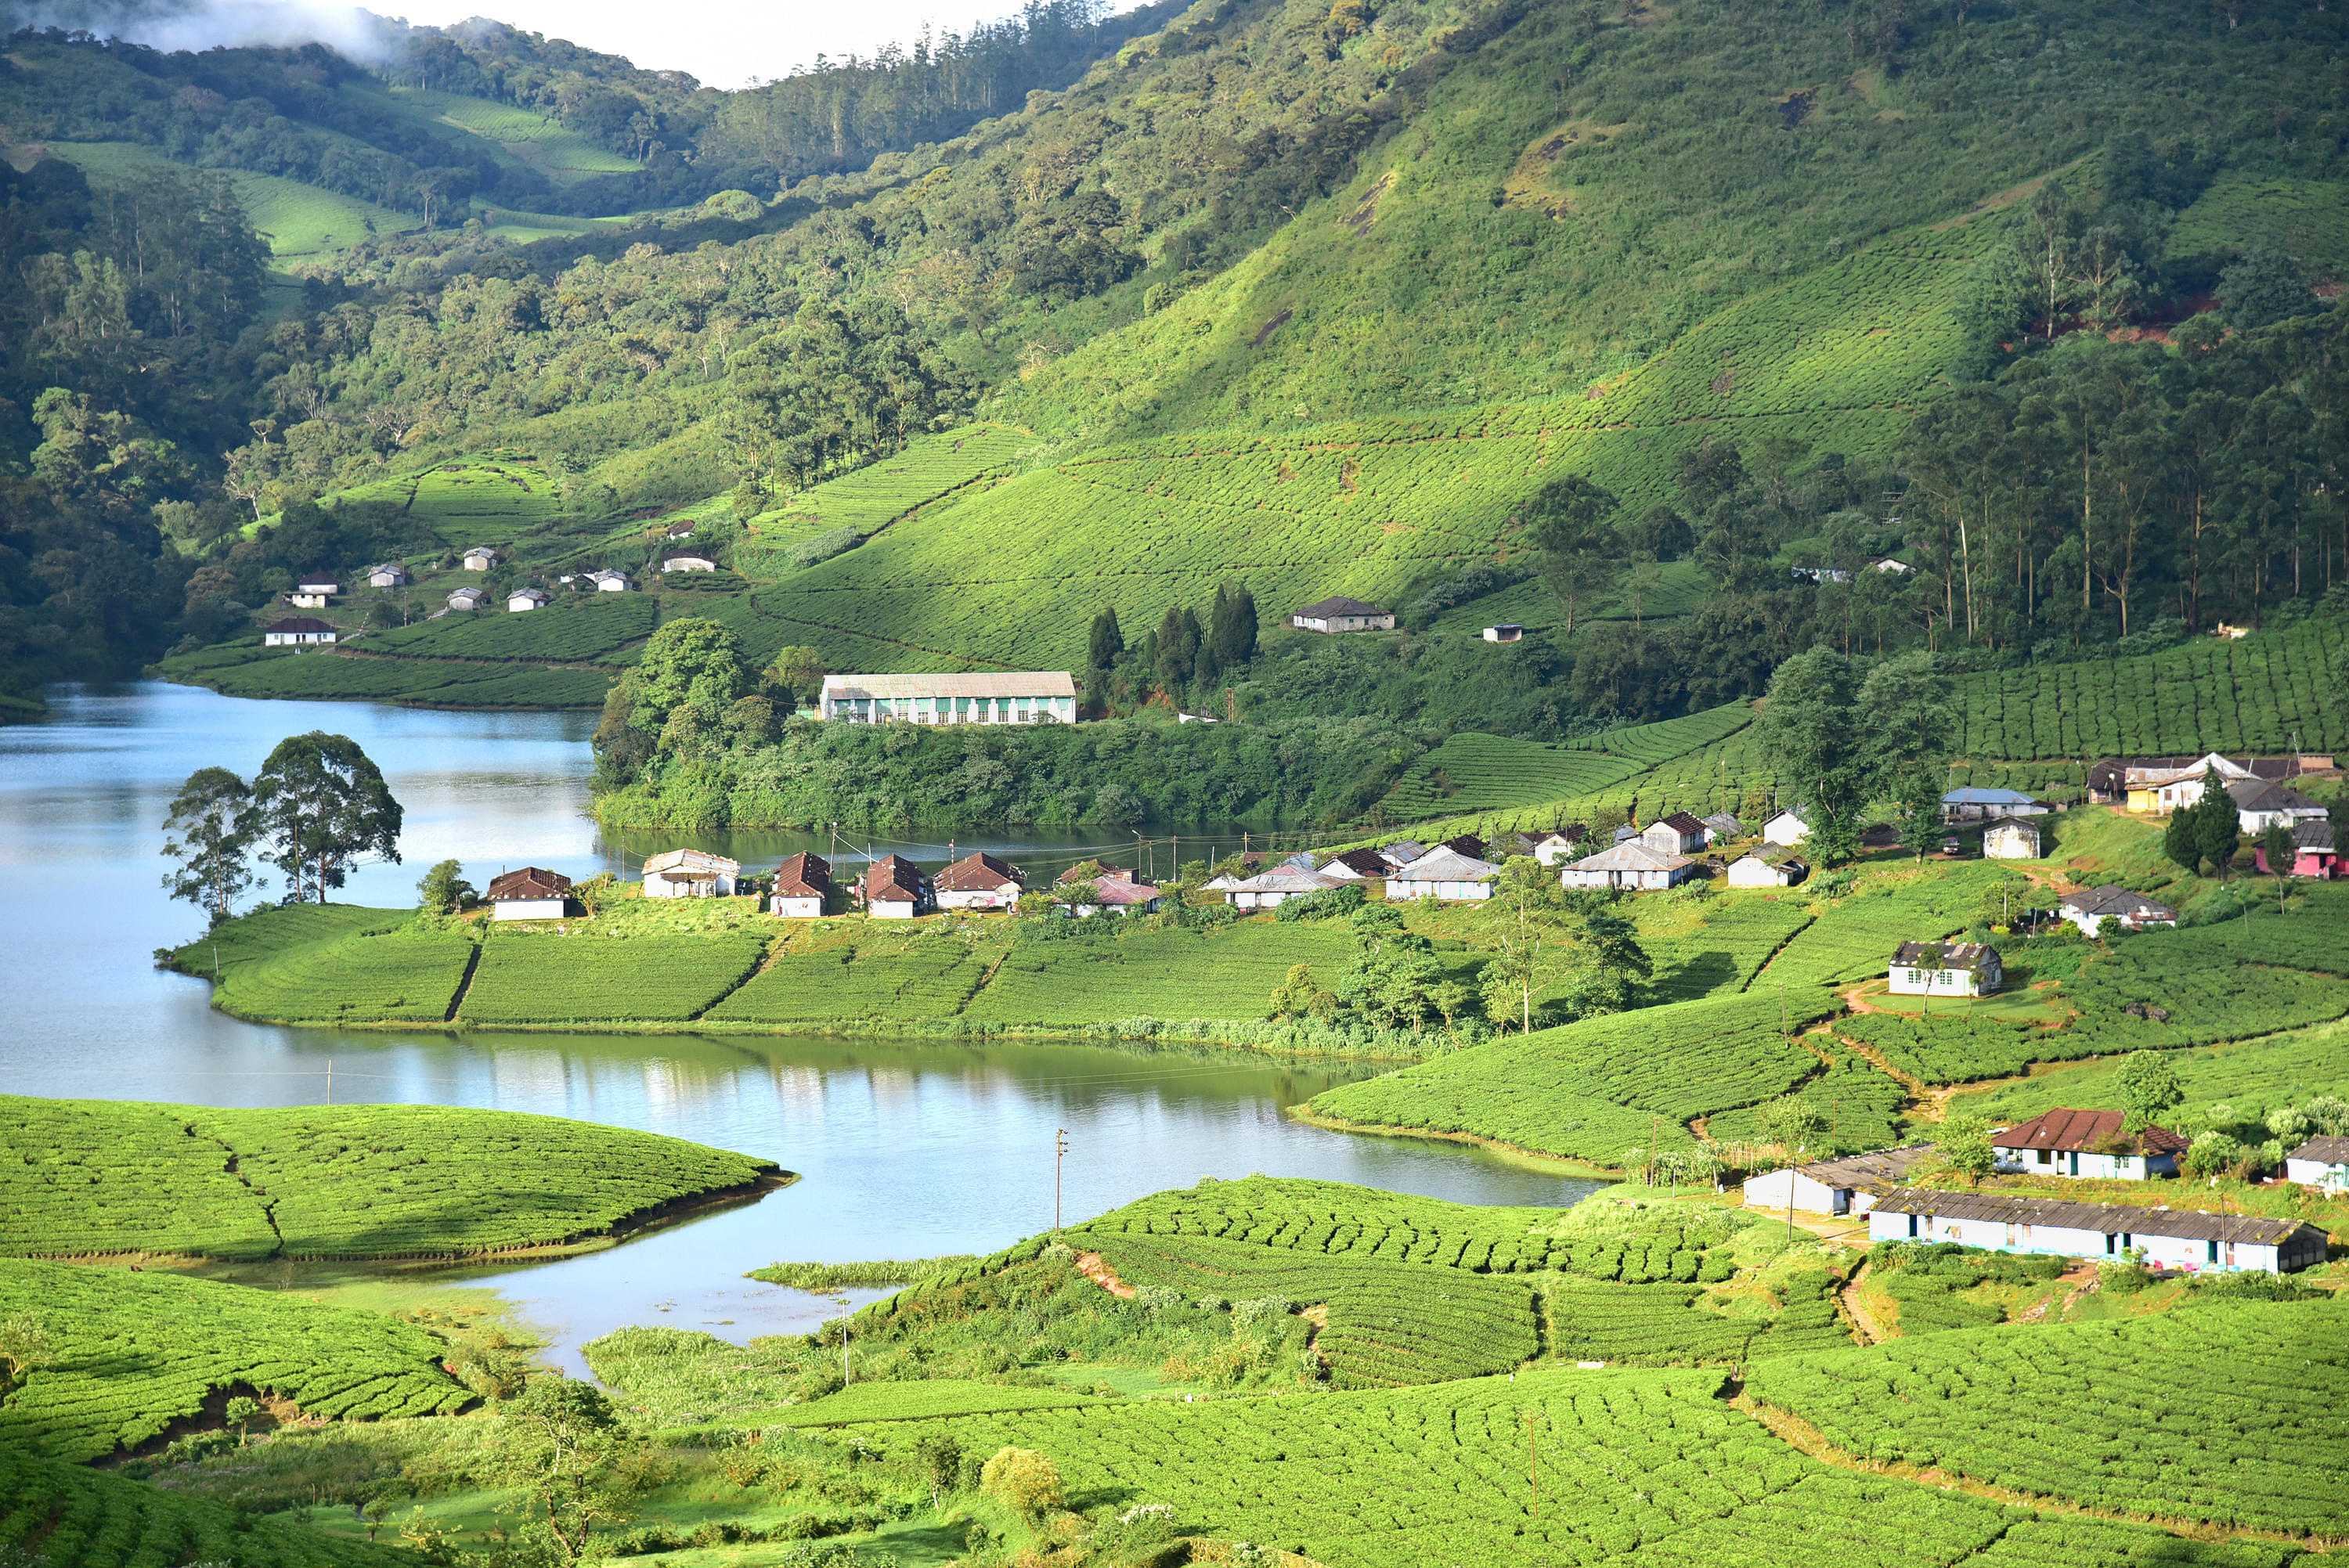 Kerala Packages from Nagpur | Get Upto 50% Off